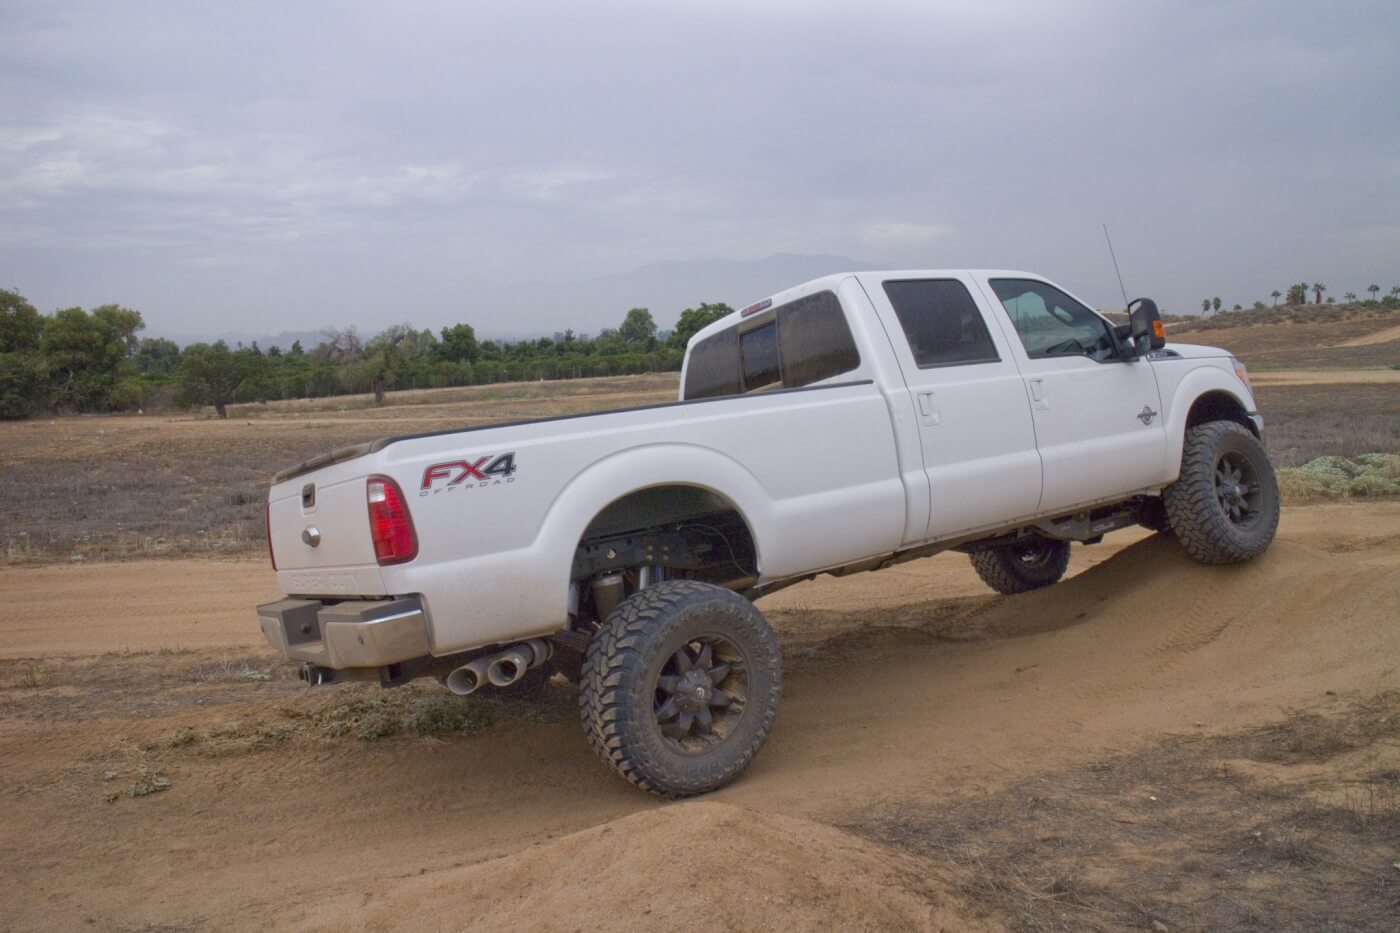 16. This view shows the flexibility of the Carli suspension on the Ford F-250 4x4. 